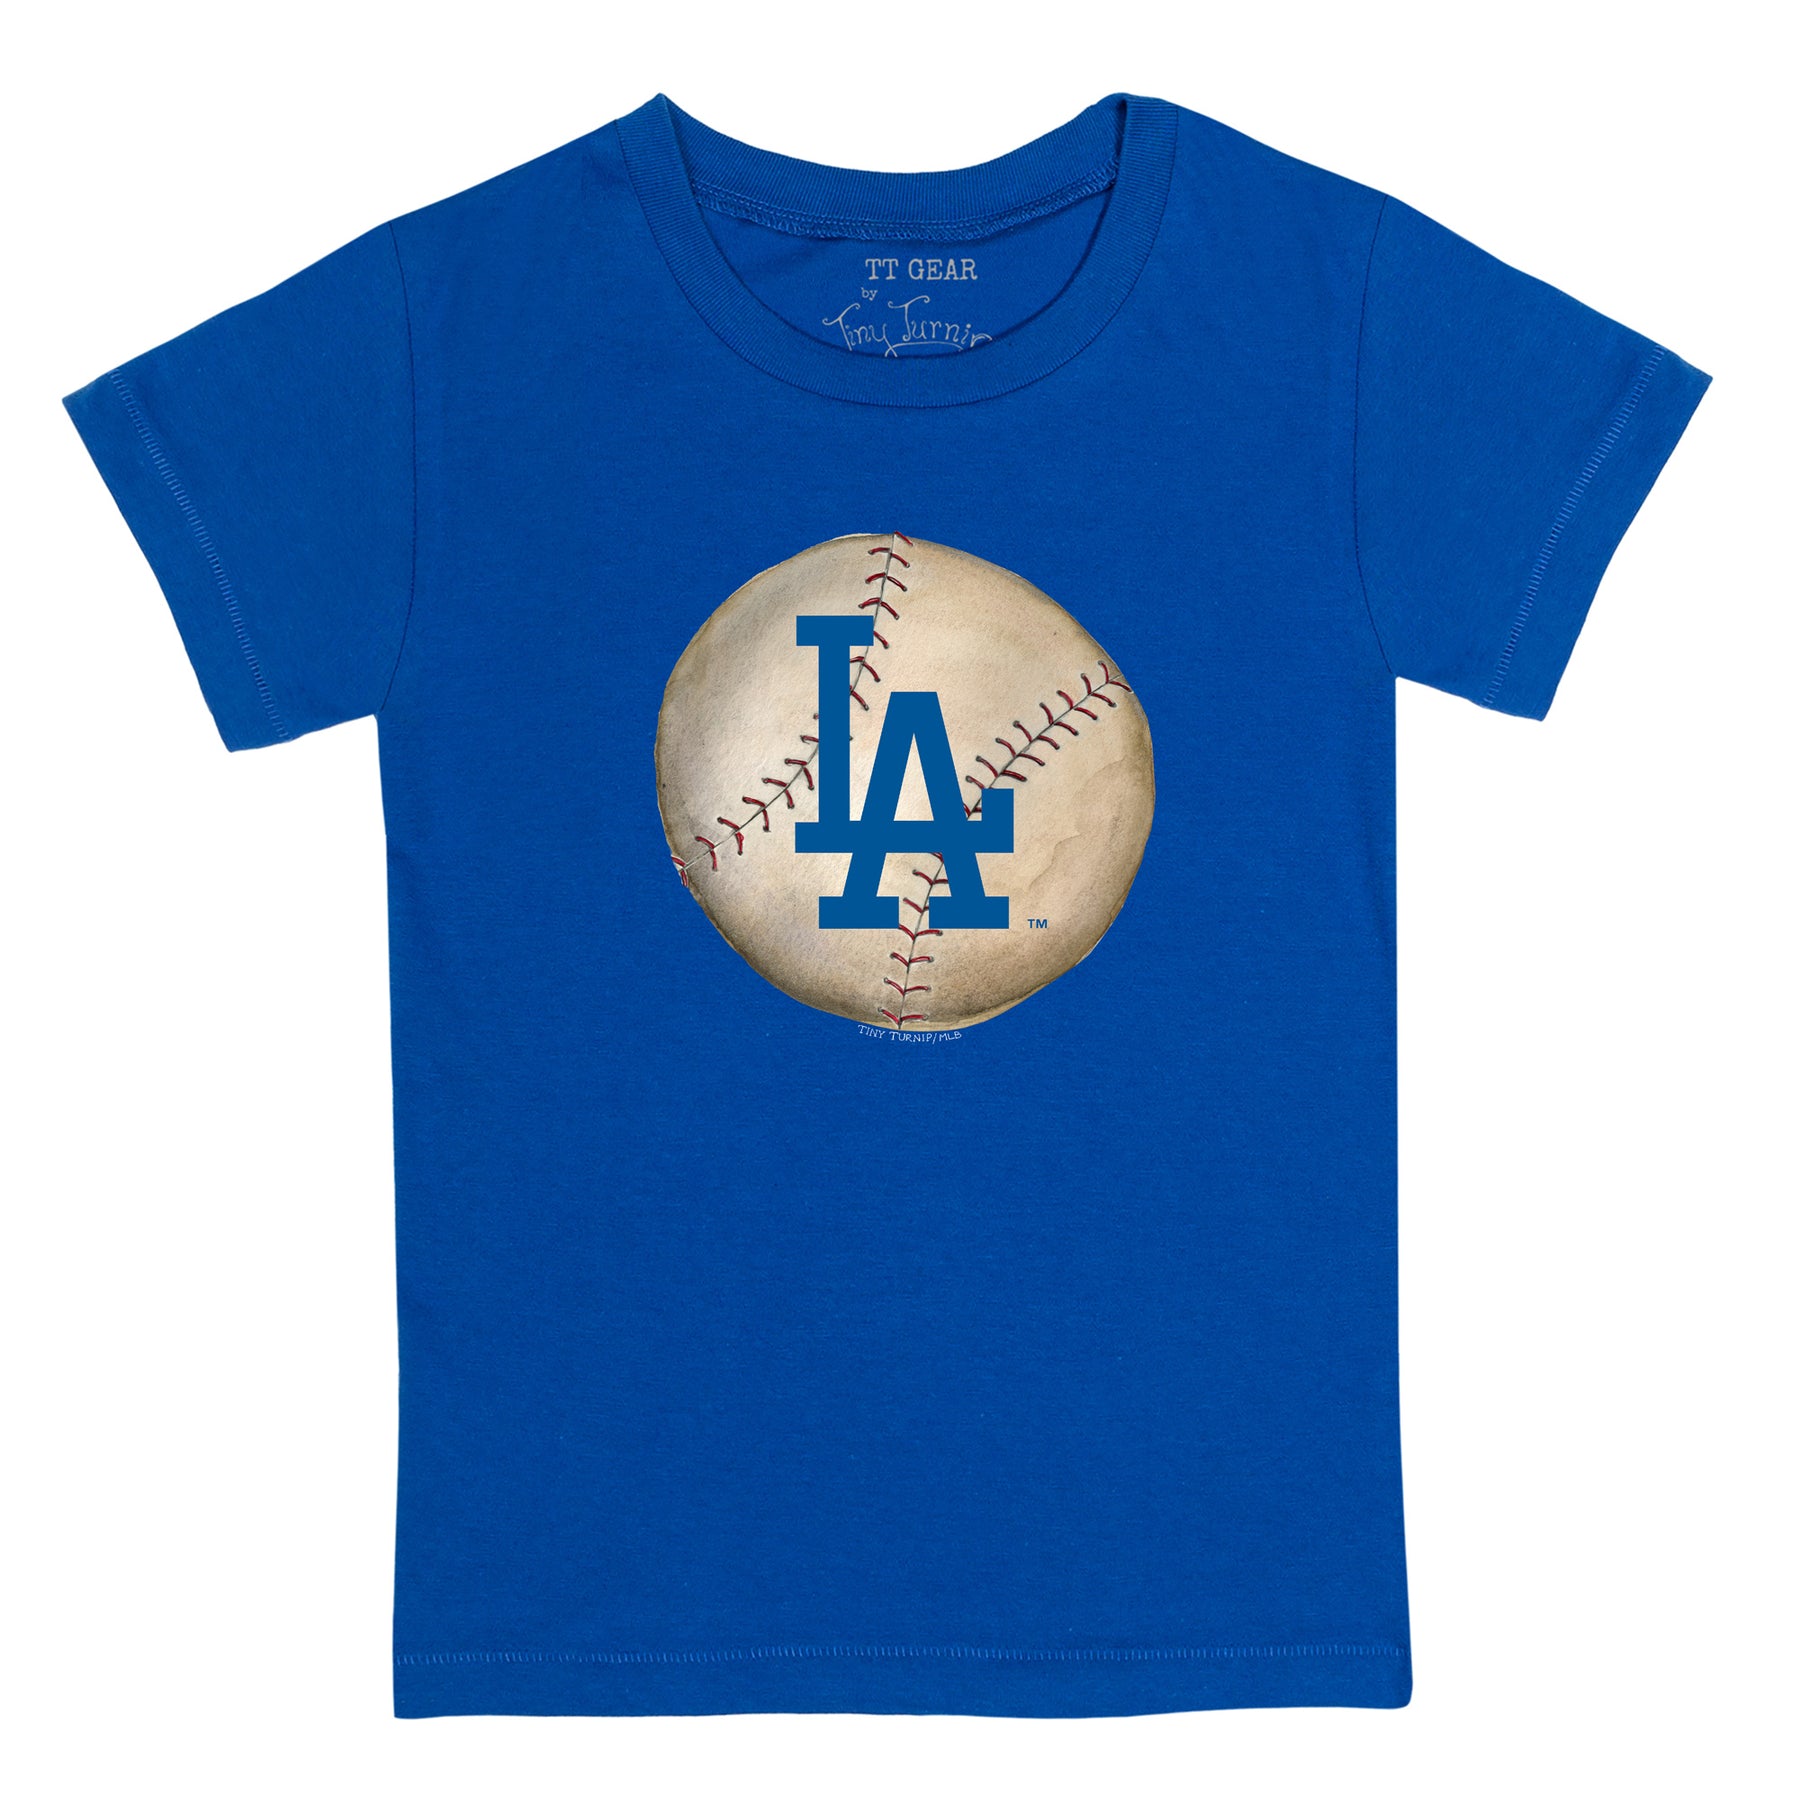 Los Angeles Dodgers Stitched Baseball Tee Shirt